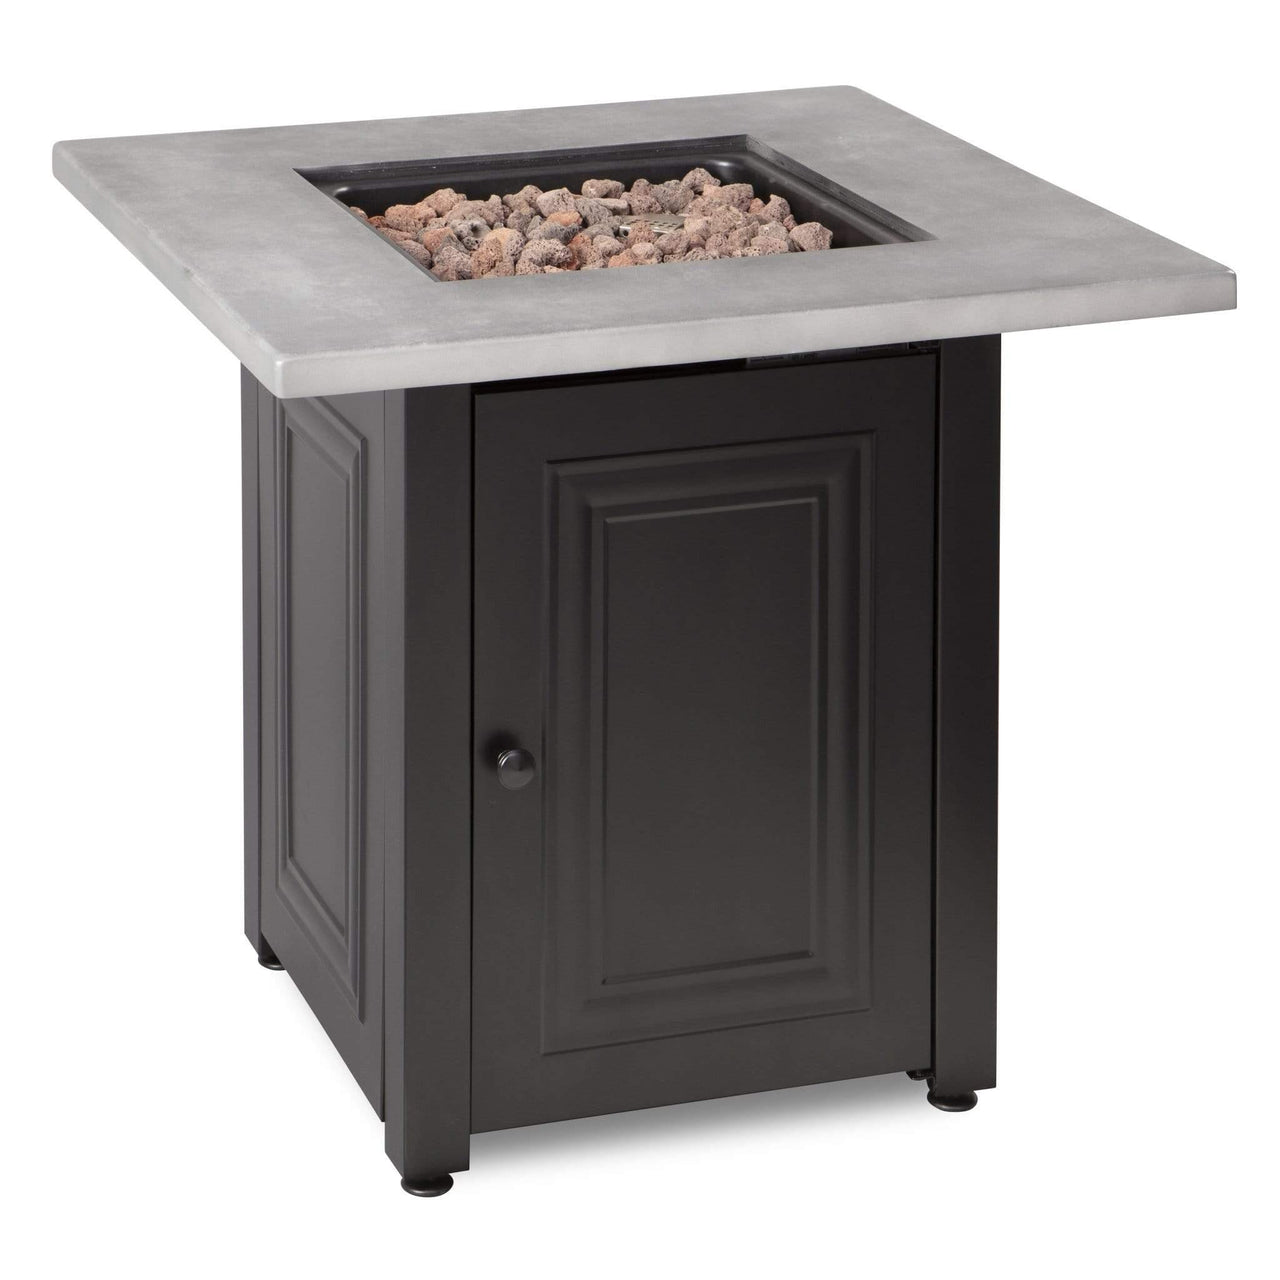 Endless Summer The Wakefield, LP Gas Outdoor Fire Pit with Concrete Resin Mantel - GAD15410M - Fire Pit Stock